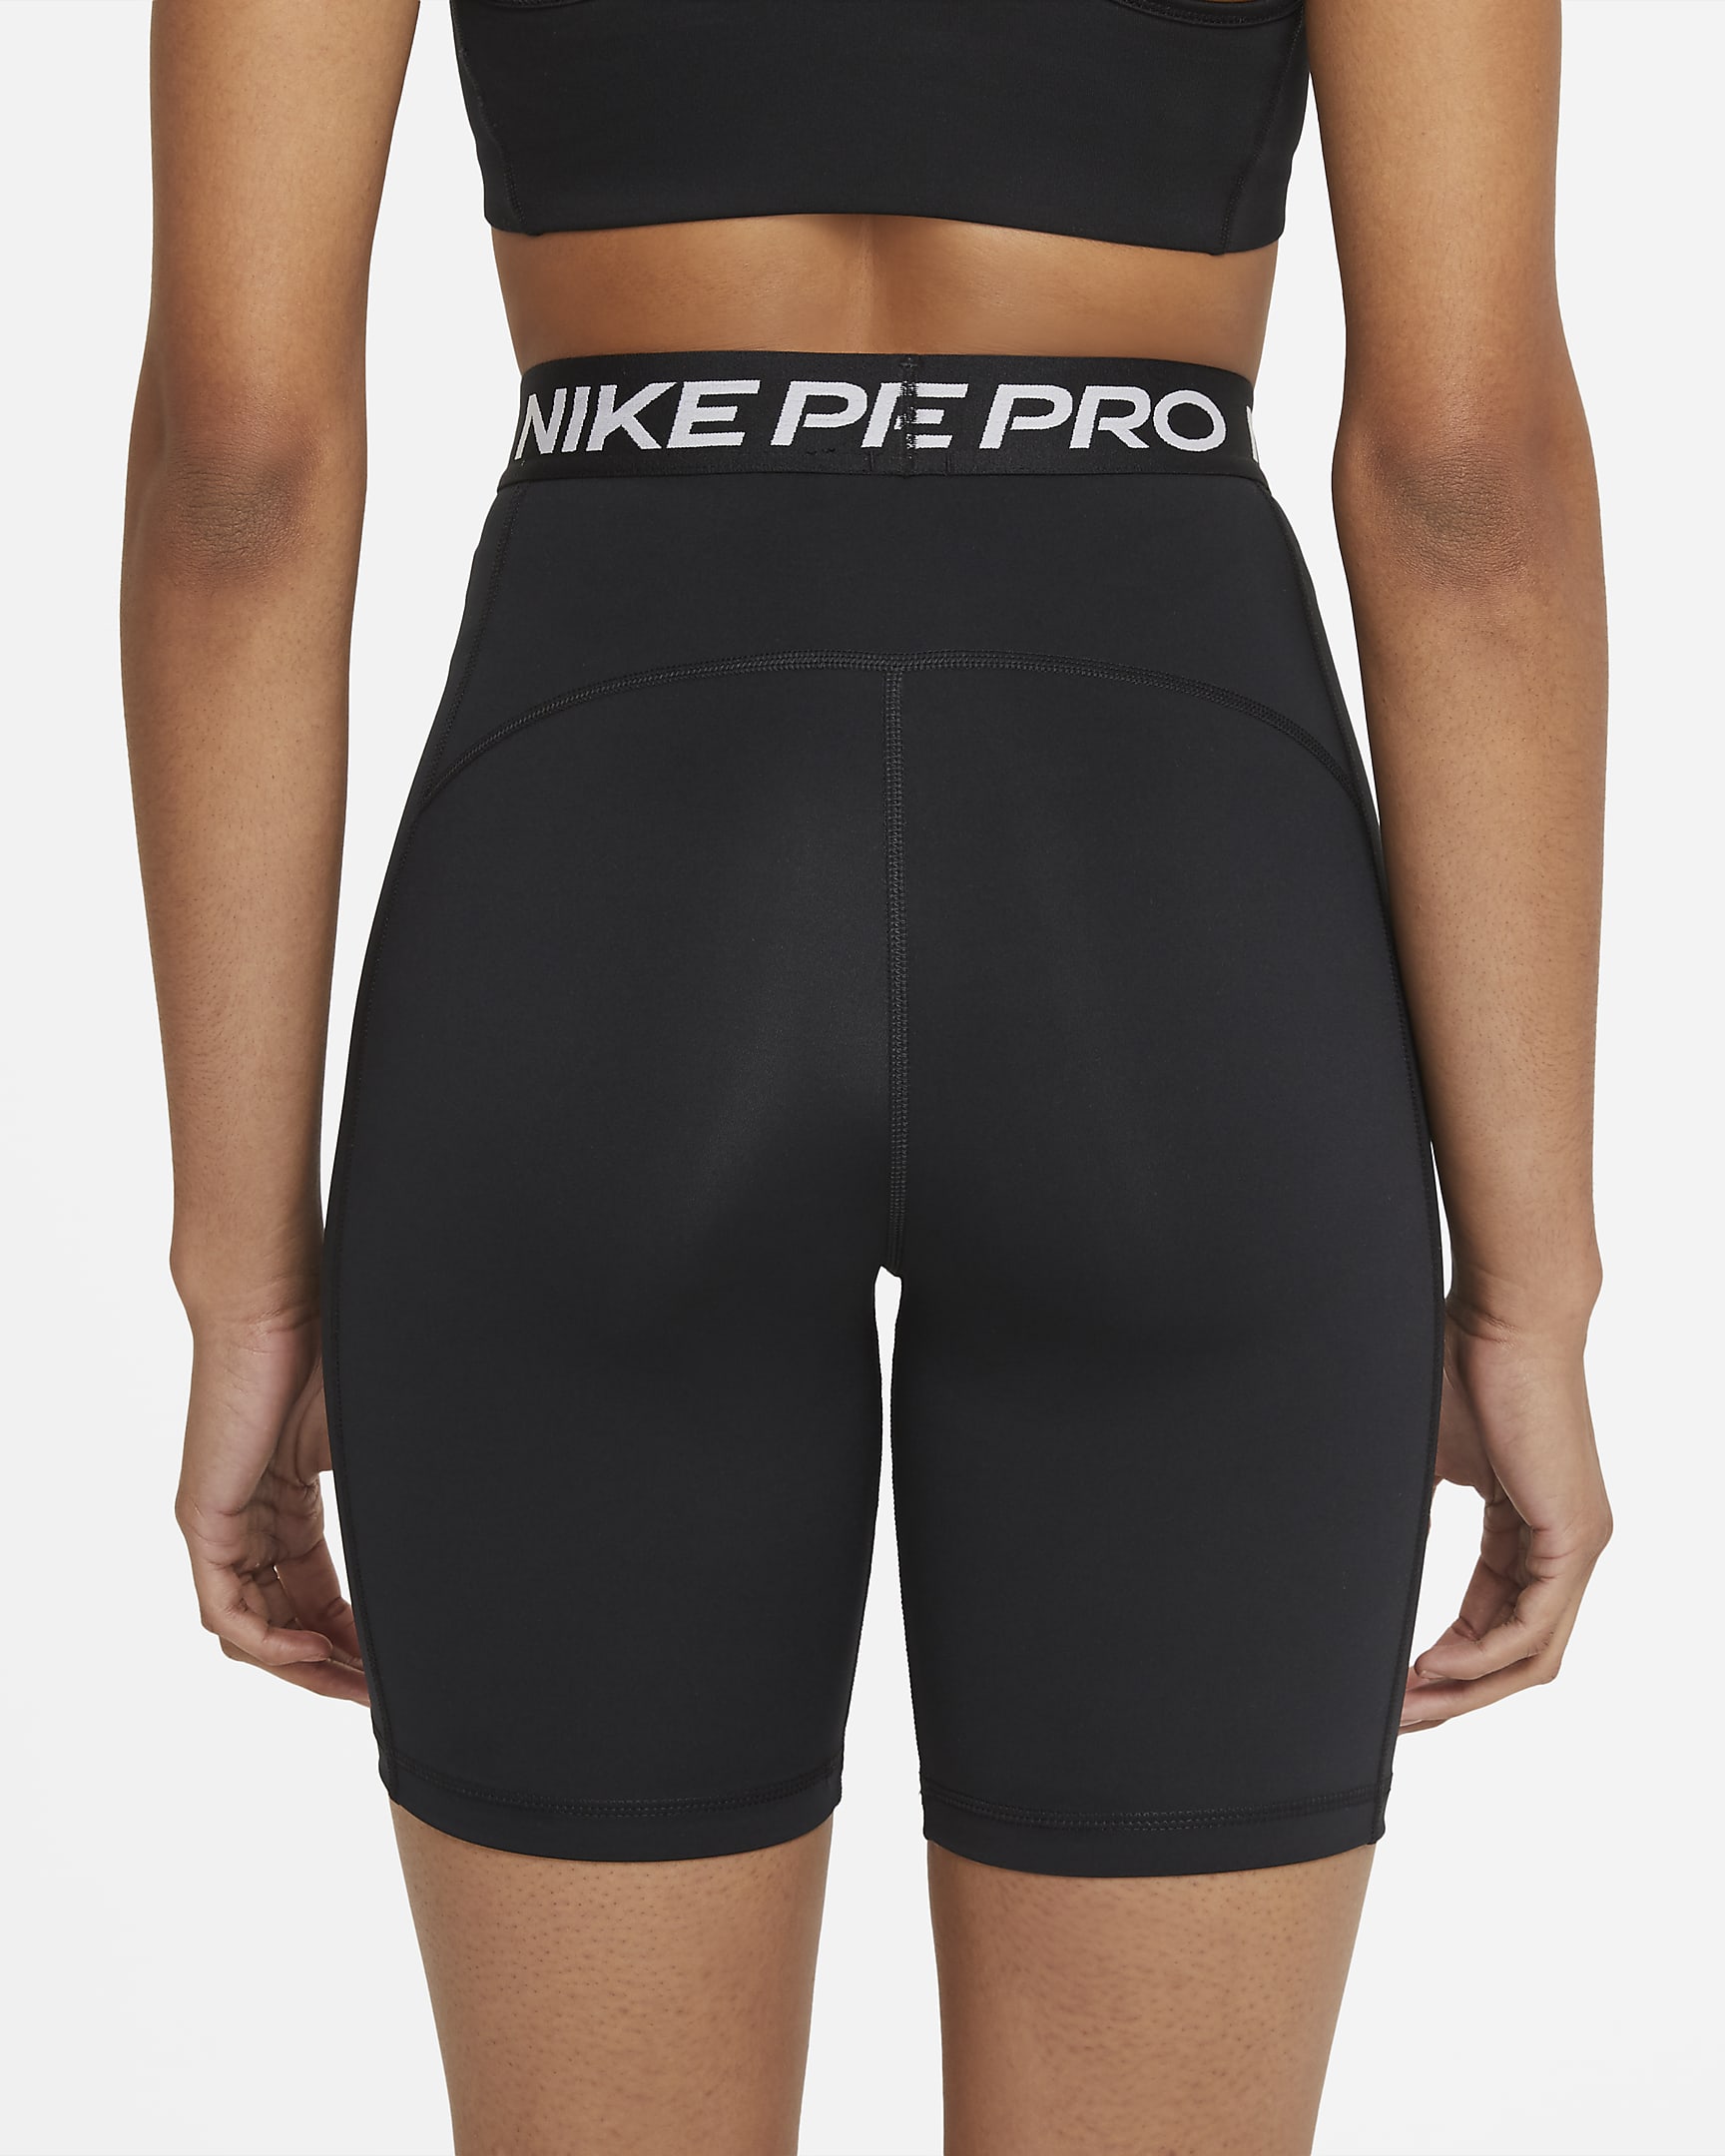 Nike Pro 365 Women's High-Waisted 18cm (approx.) Shorts - Black/White